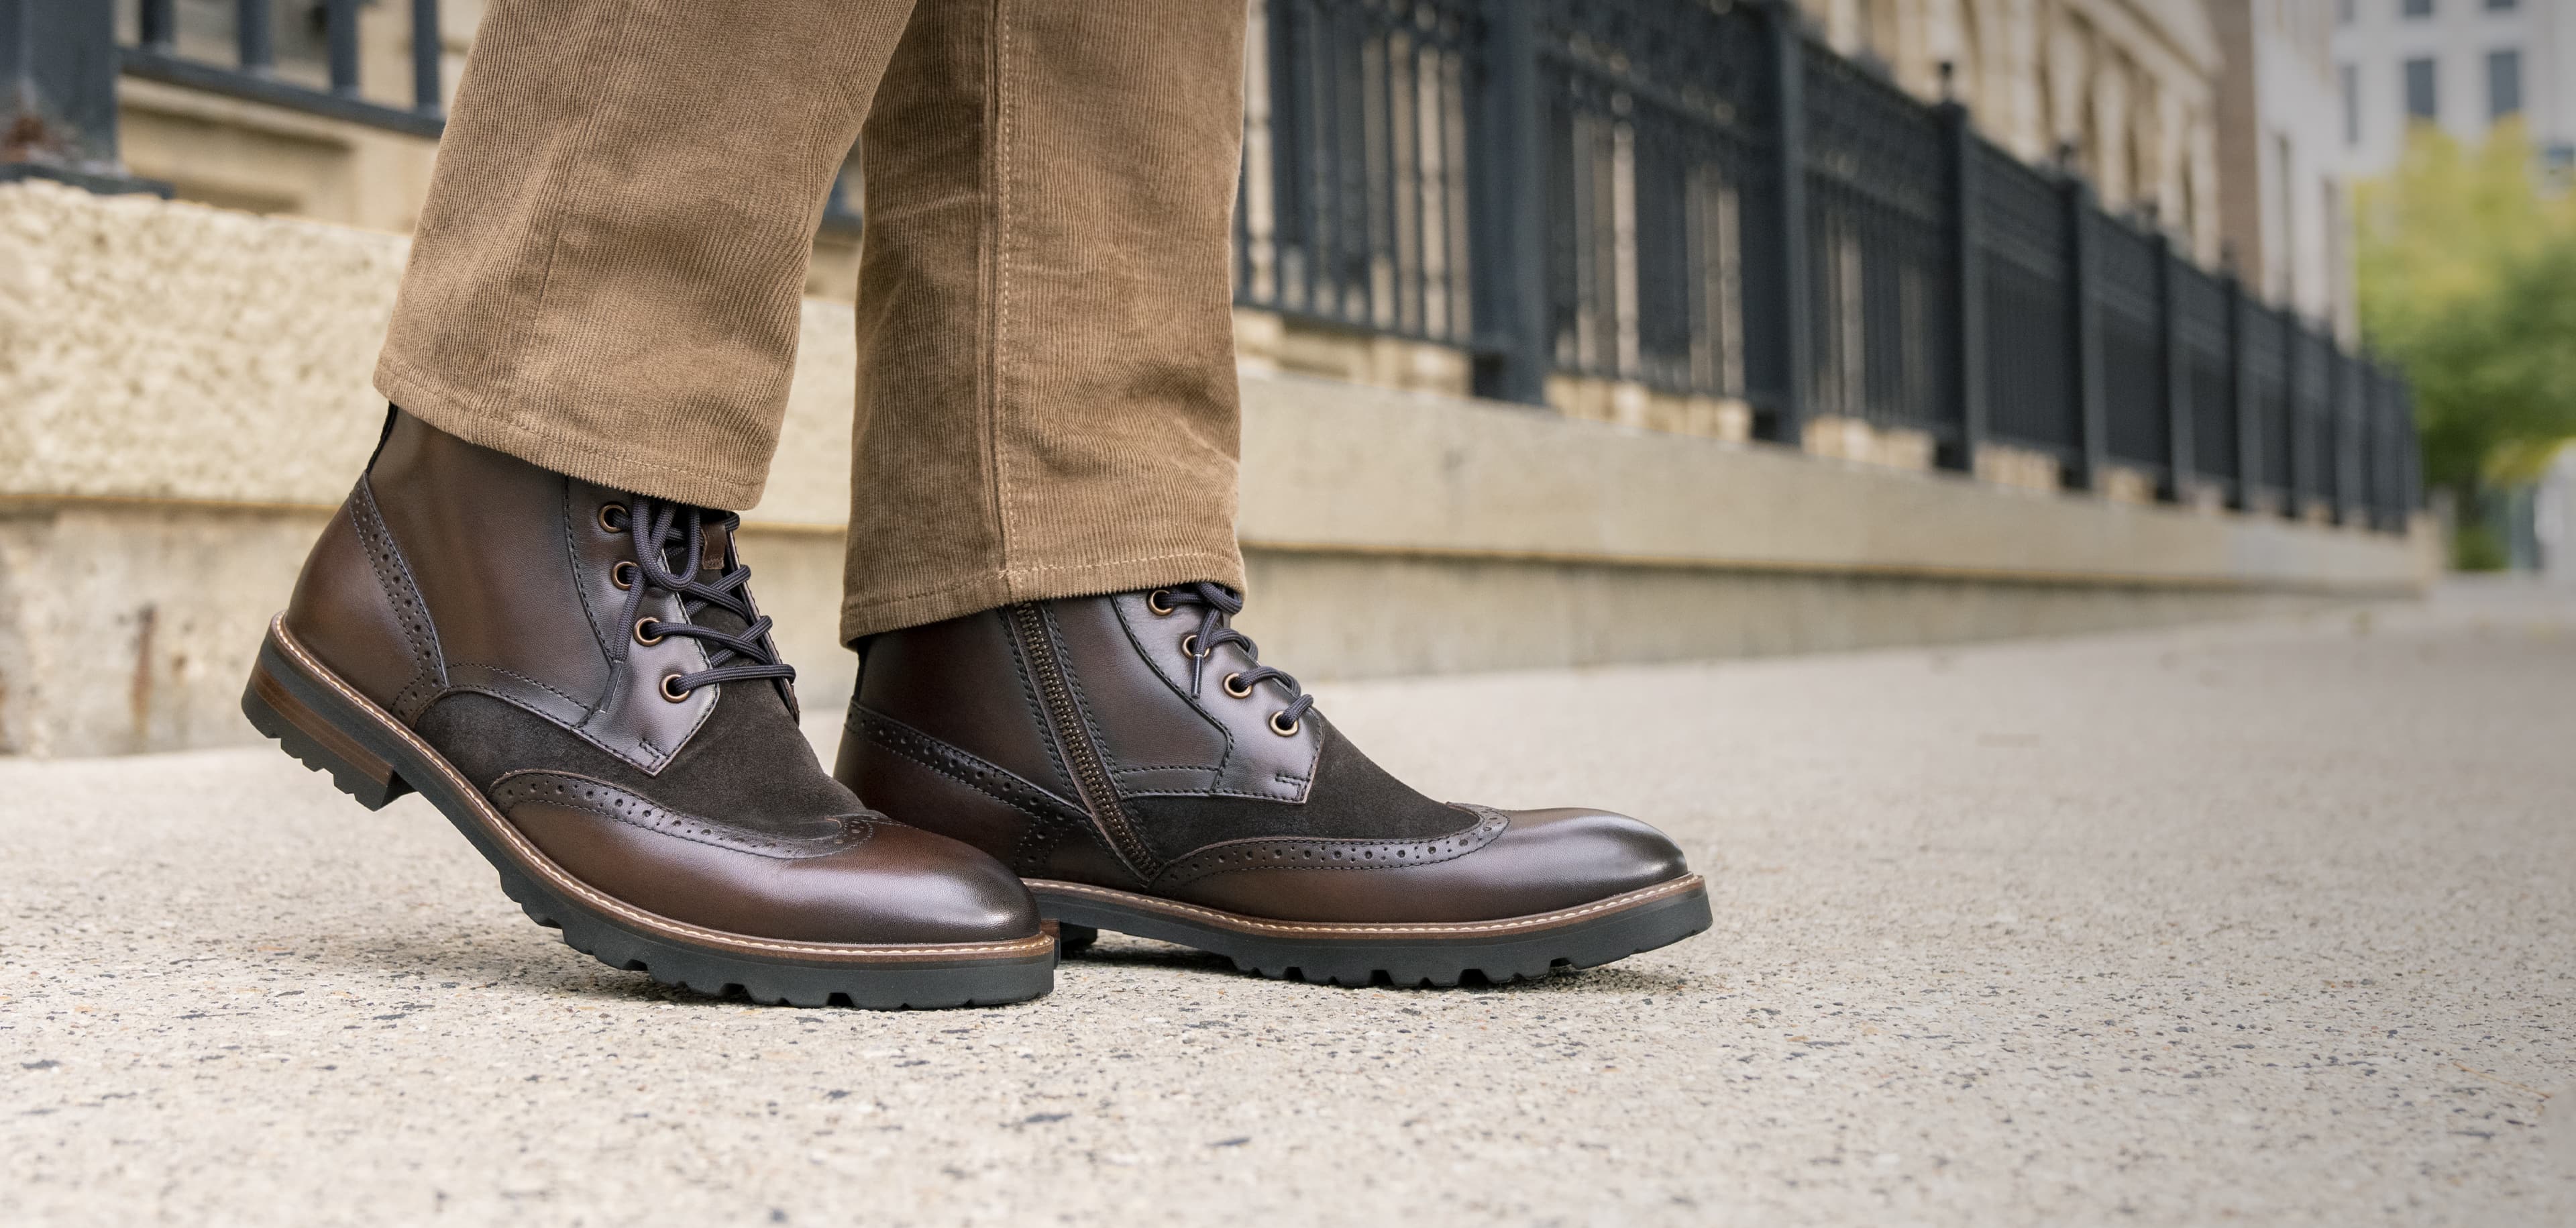 Click to shop Florsheim New Arrivals. Image features the Renegade Wingtip Boot in brown.